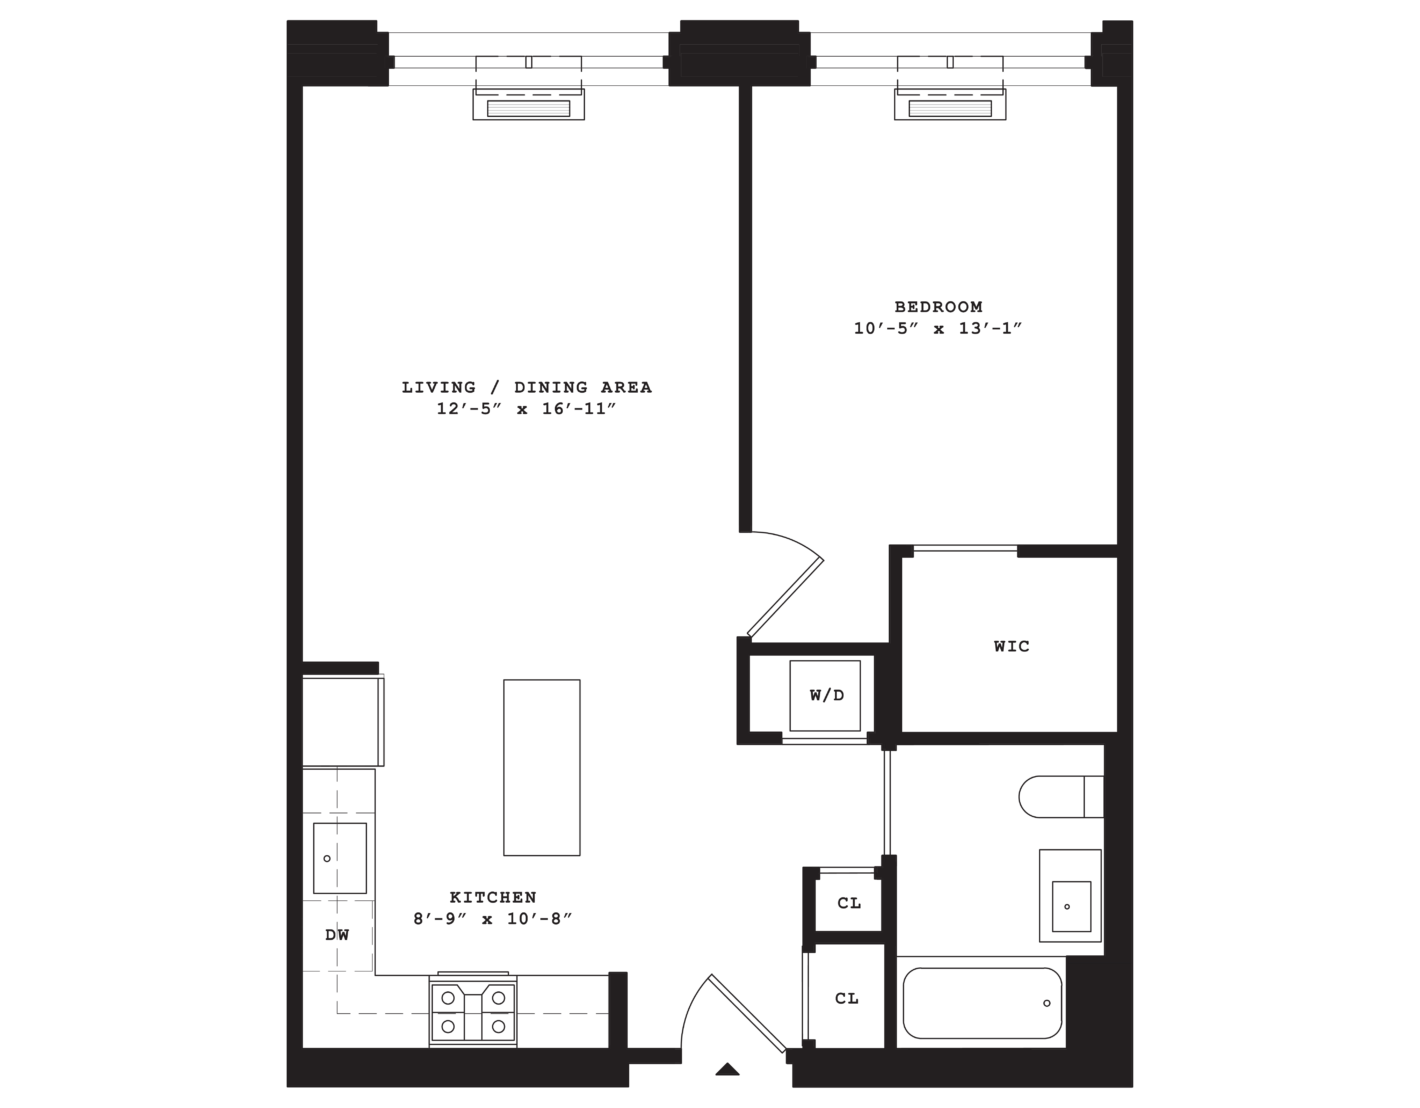 Eleven33 1 bedroom, 1 bathroom open layout floorplan with a large Master walk-in closet and a modern kitchen with island.